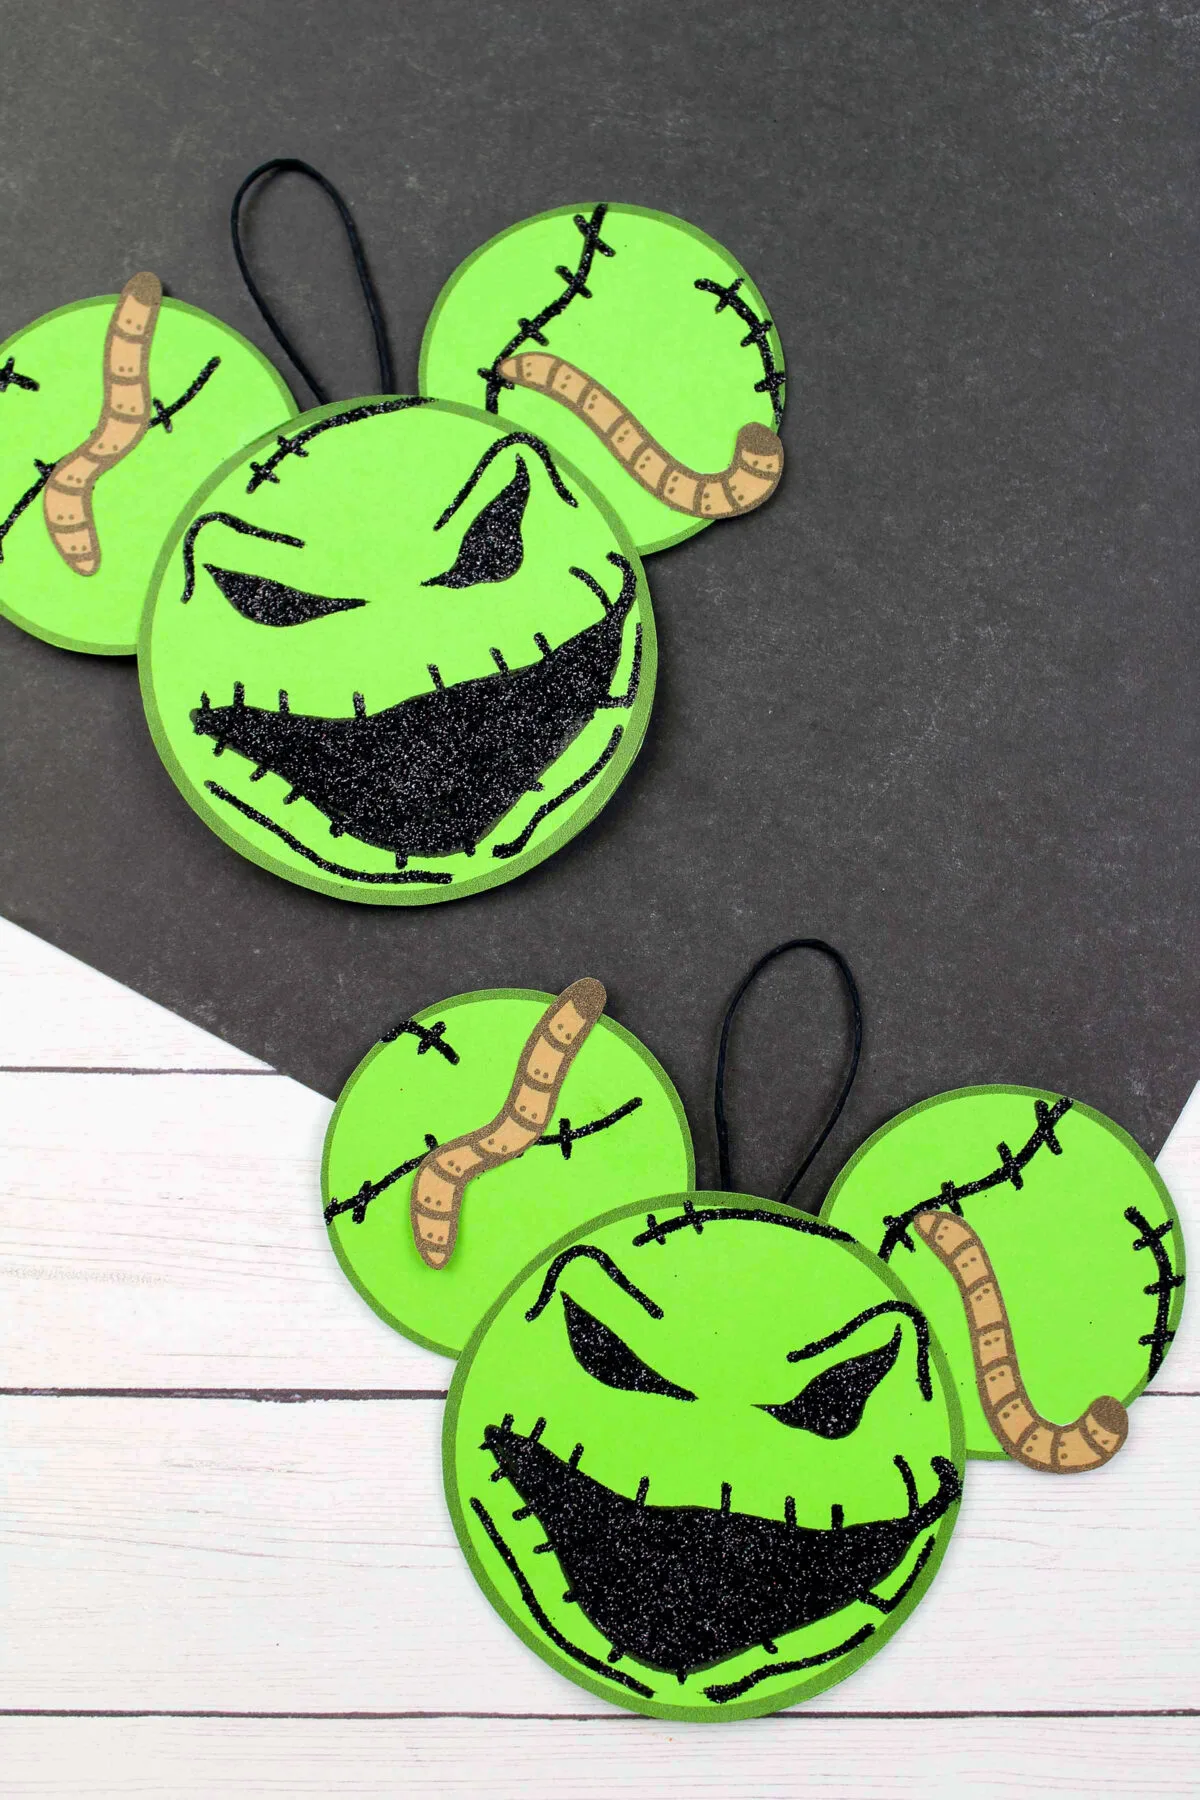 Make this easy DIY Oogie Boogie Mickey Ears Ornament as part of your Disney inspired Christmas tree decorations. Free printable template!